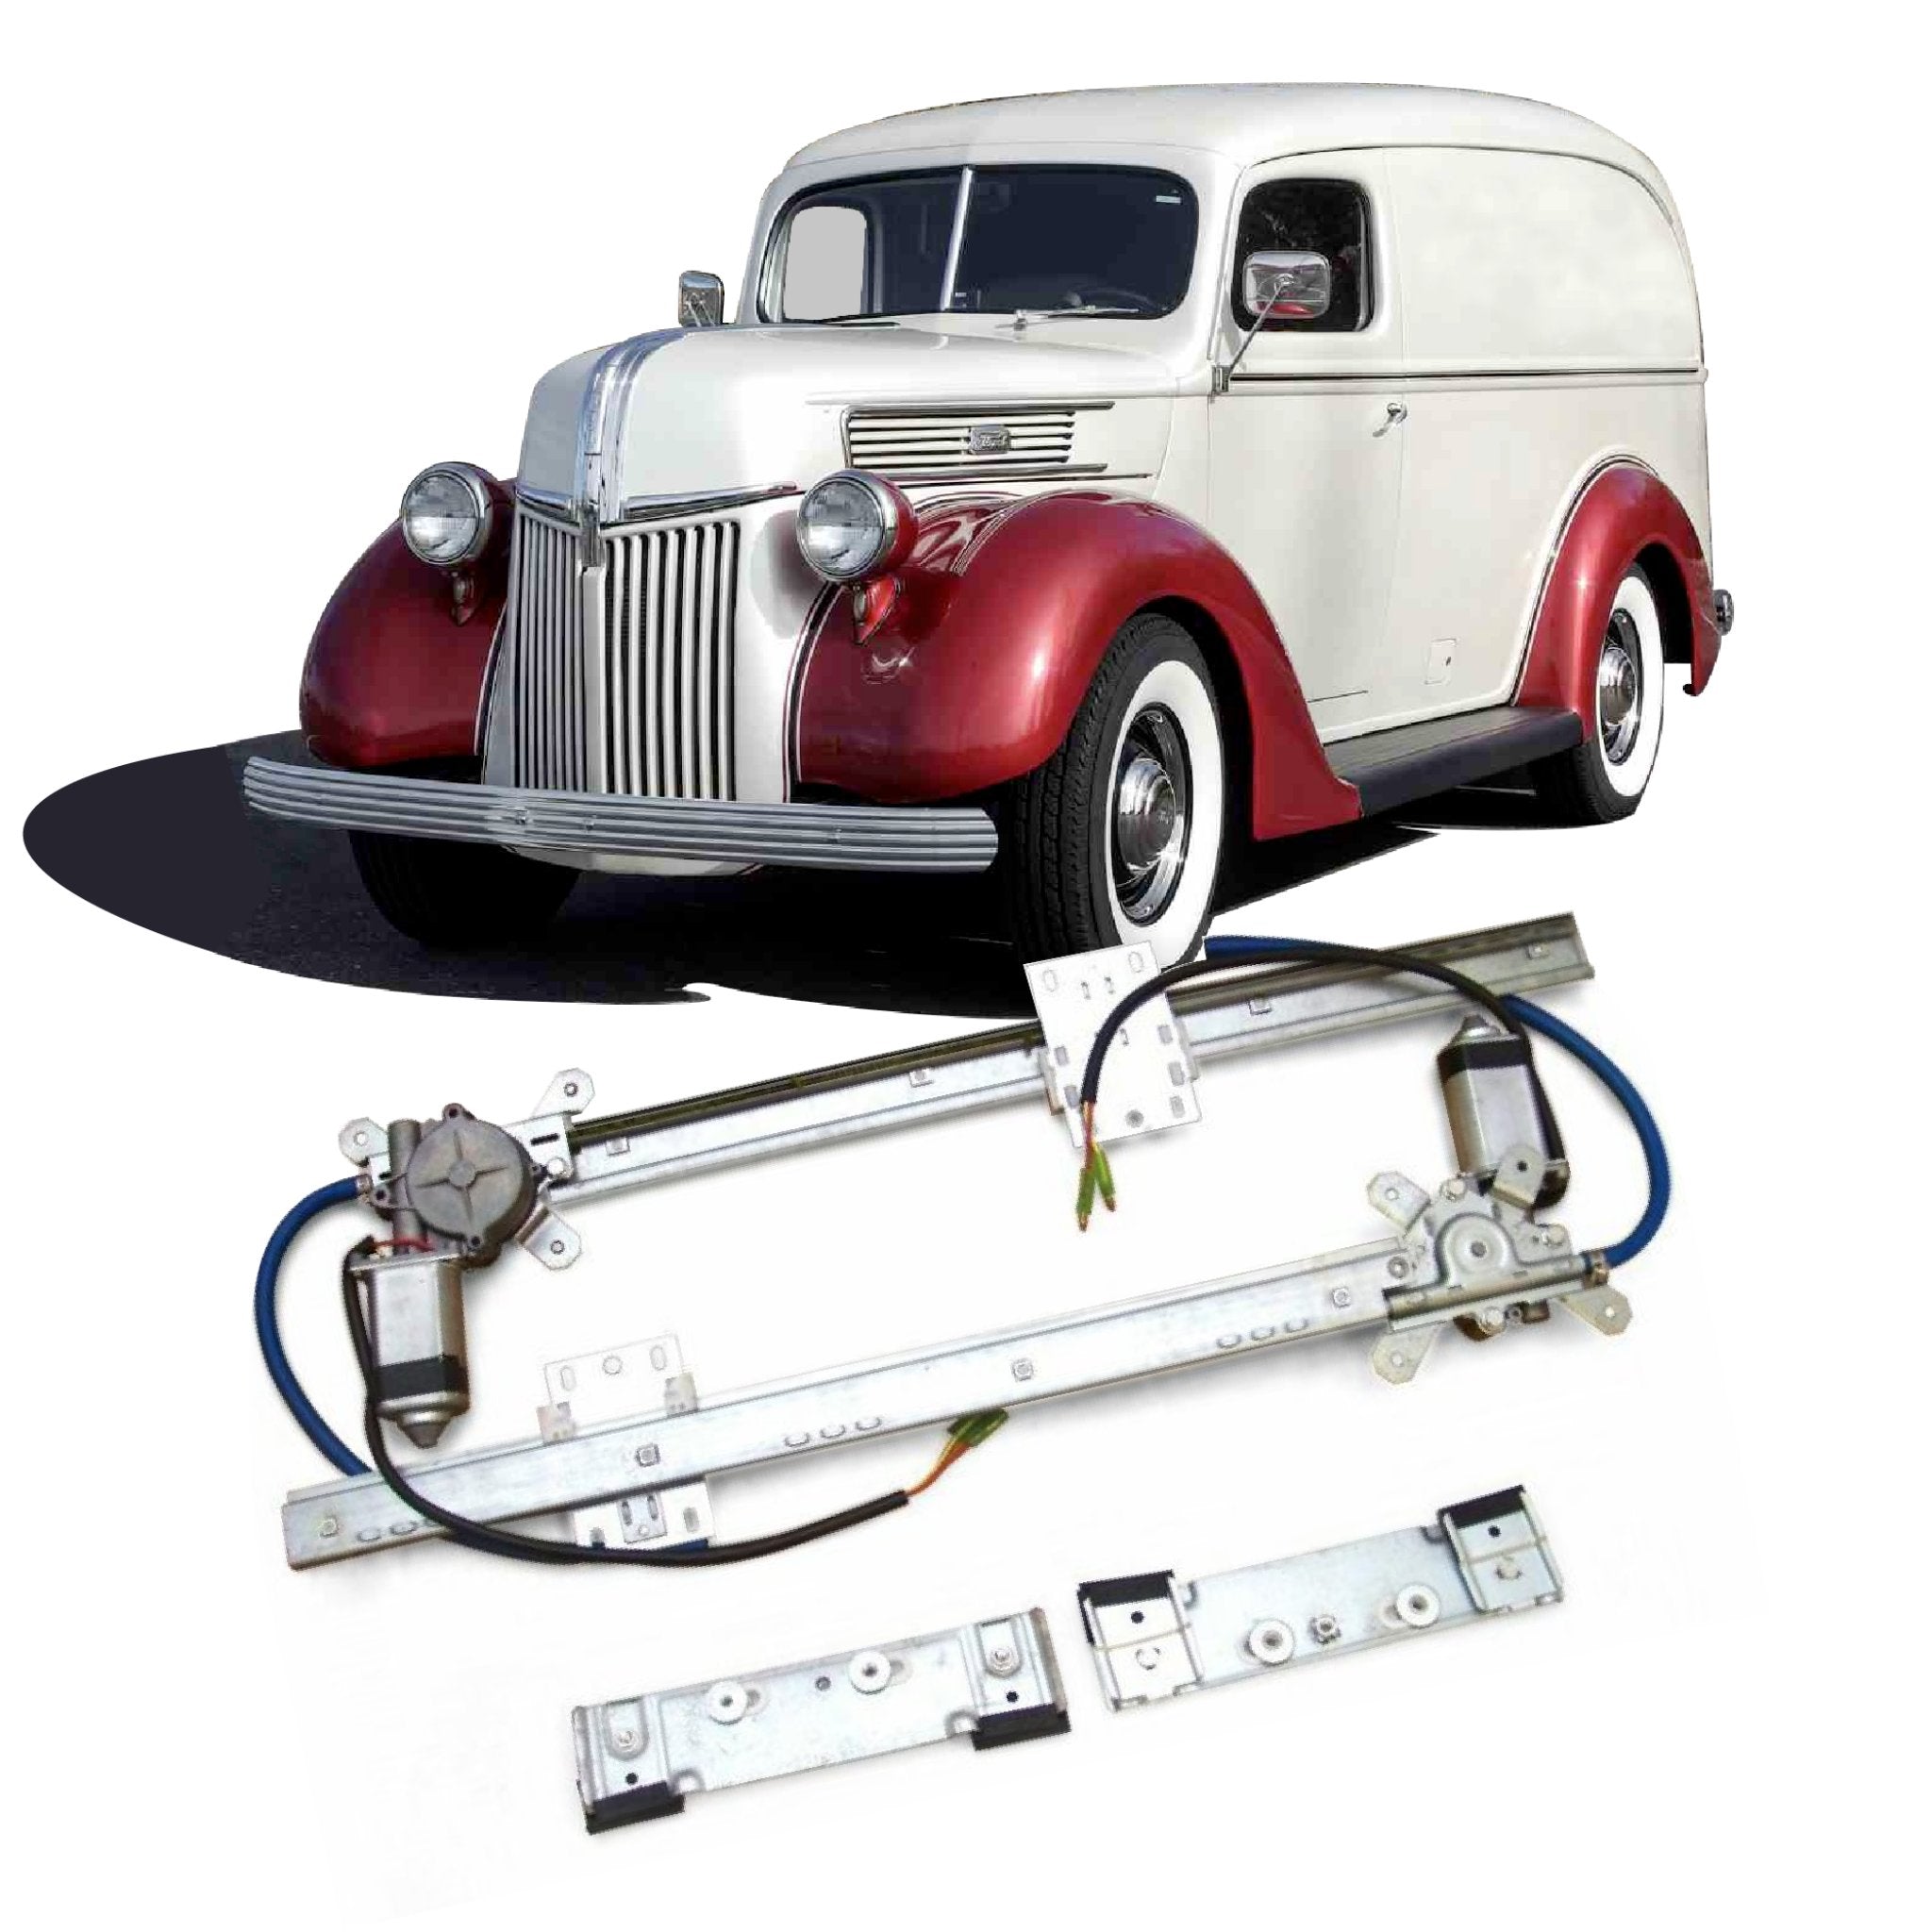 Autoloc 2 Door 12V Electric Power Window Conversion Kit for 1941 Ford Delivery